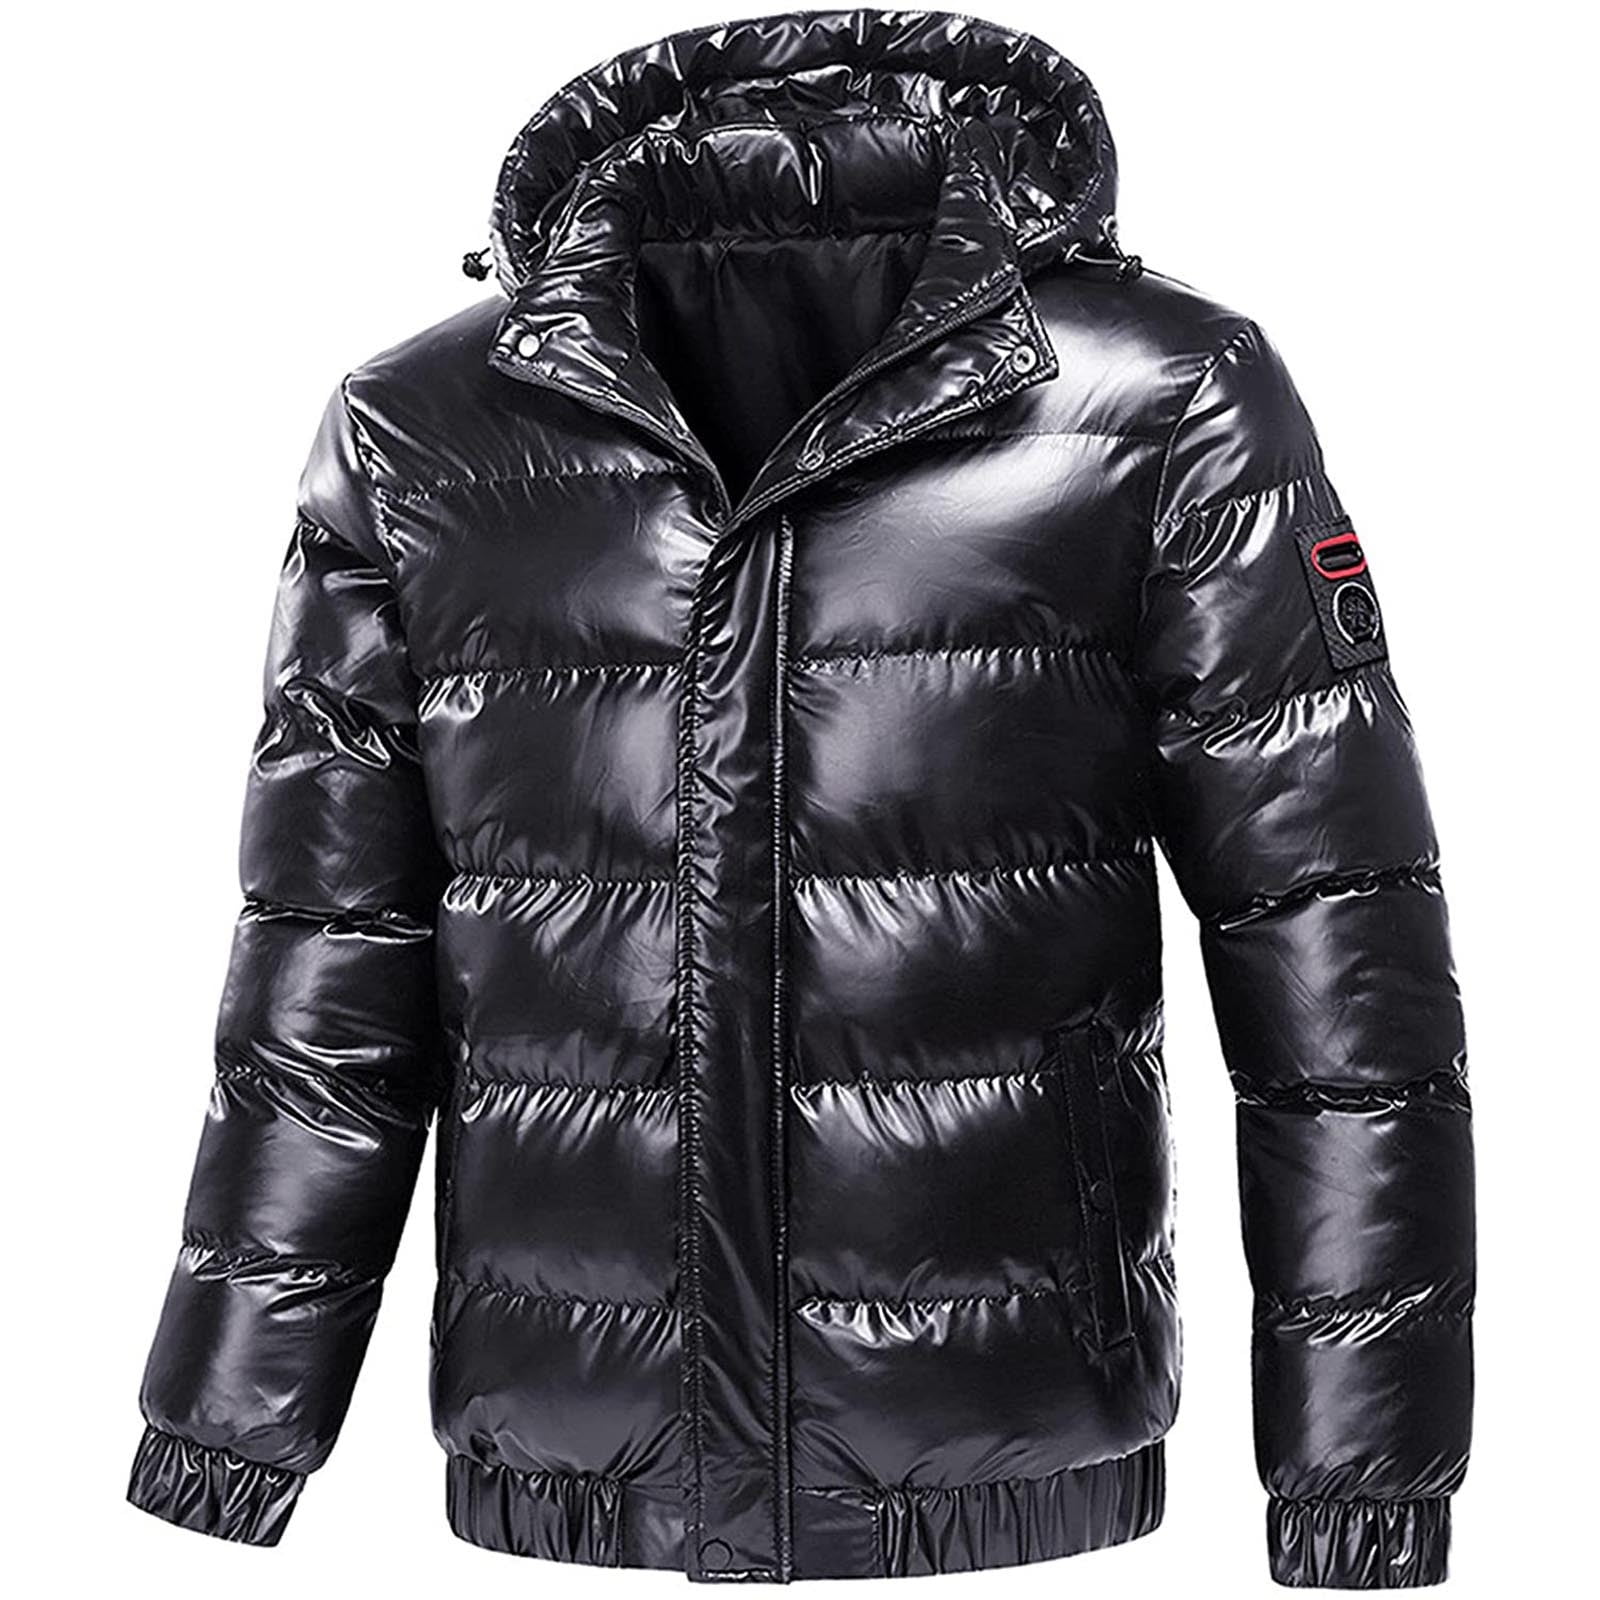 Clothing & Shoes - Jackets & Coats - Puffer Jackets - HFX Ladies Quilted  Jacket - Online Shopping for Canadians